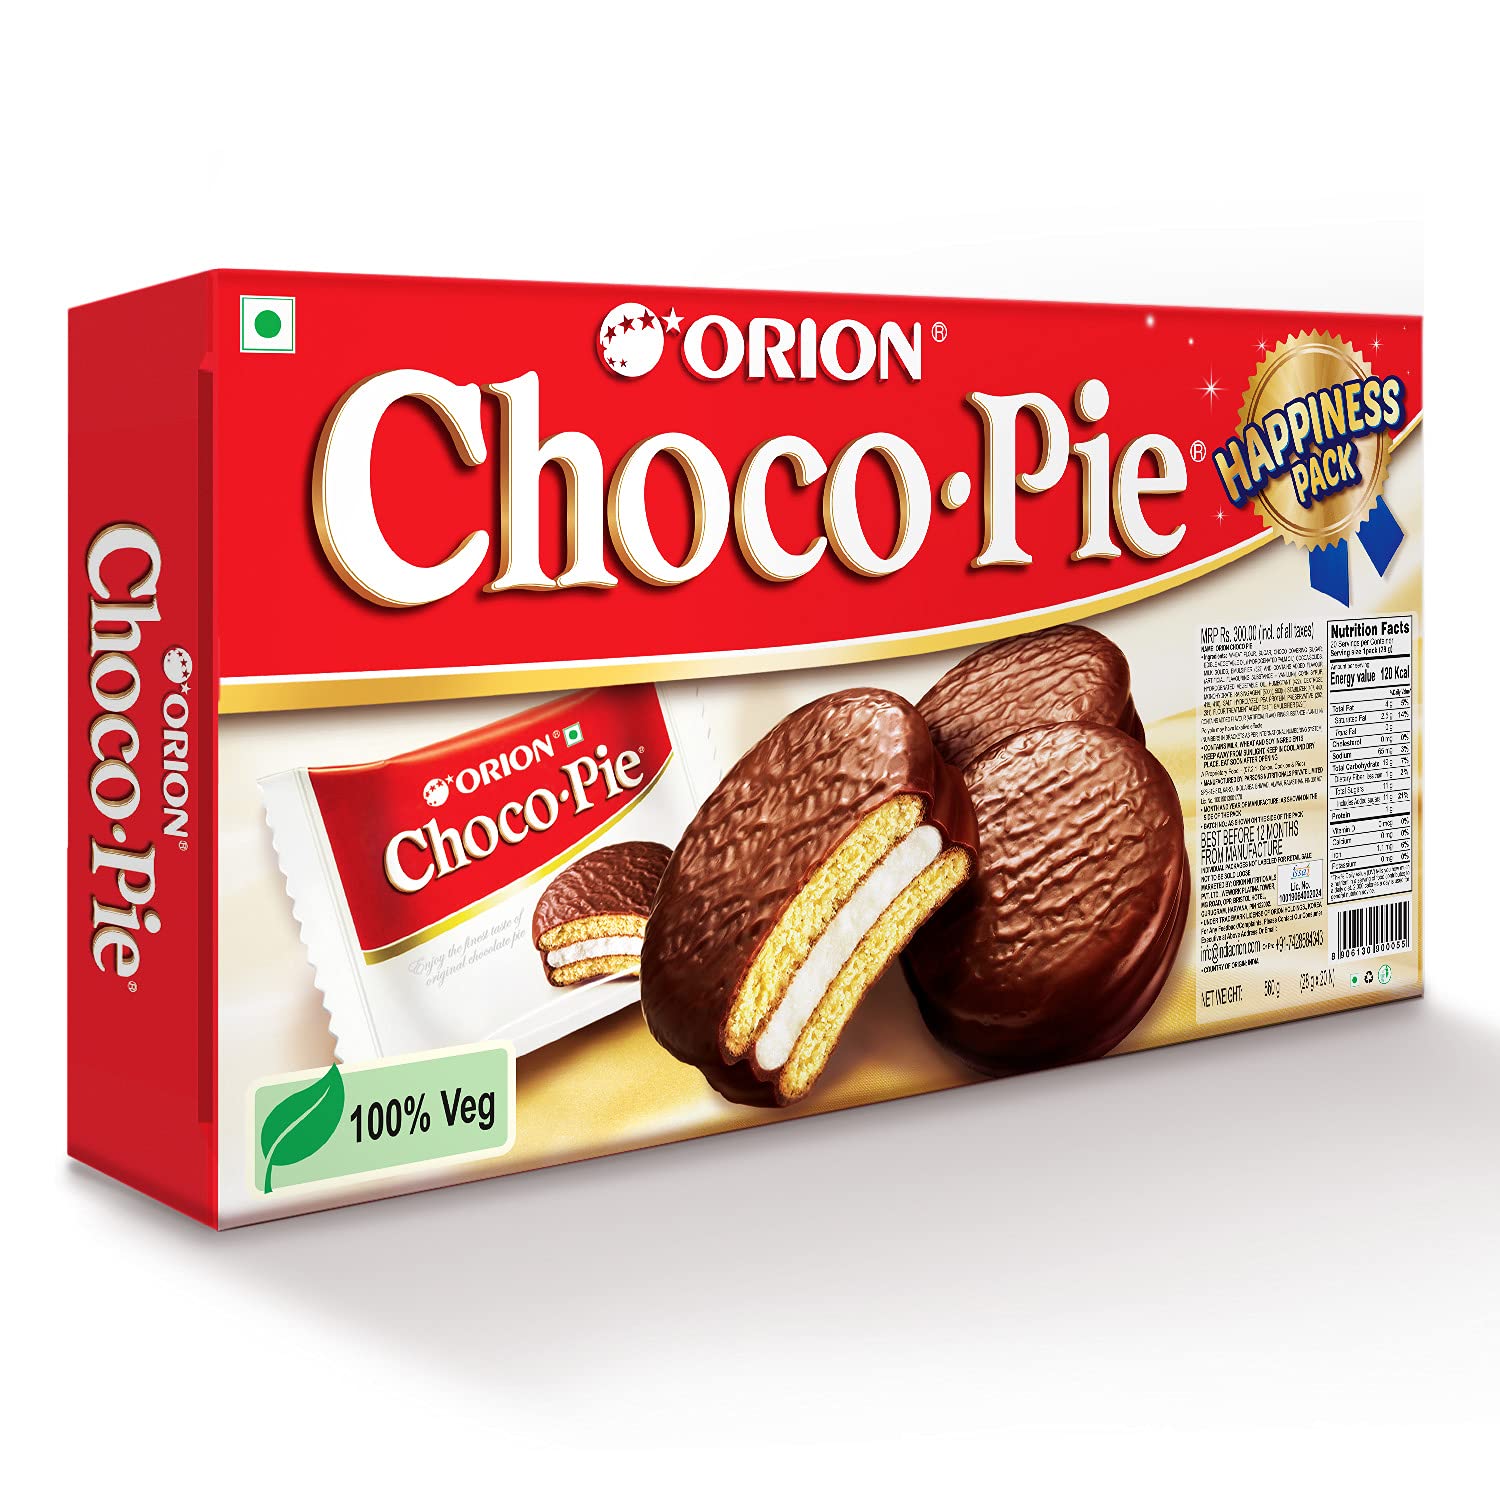 Orion Choco Pie Chocolate Coated Biscuit Image